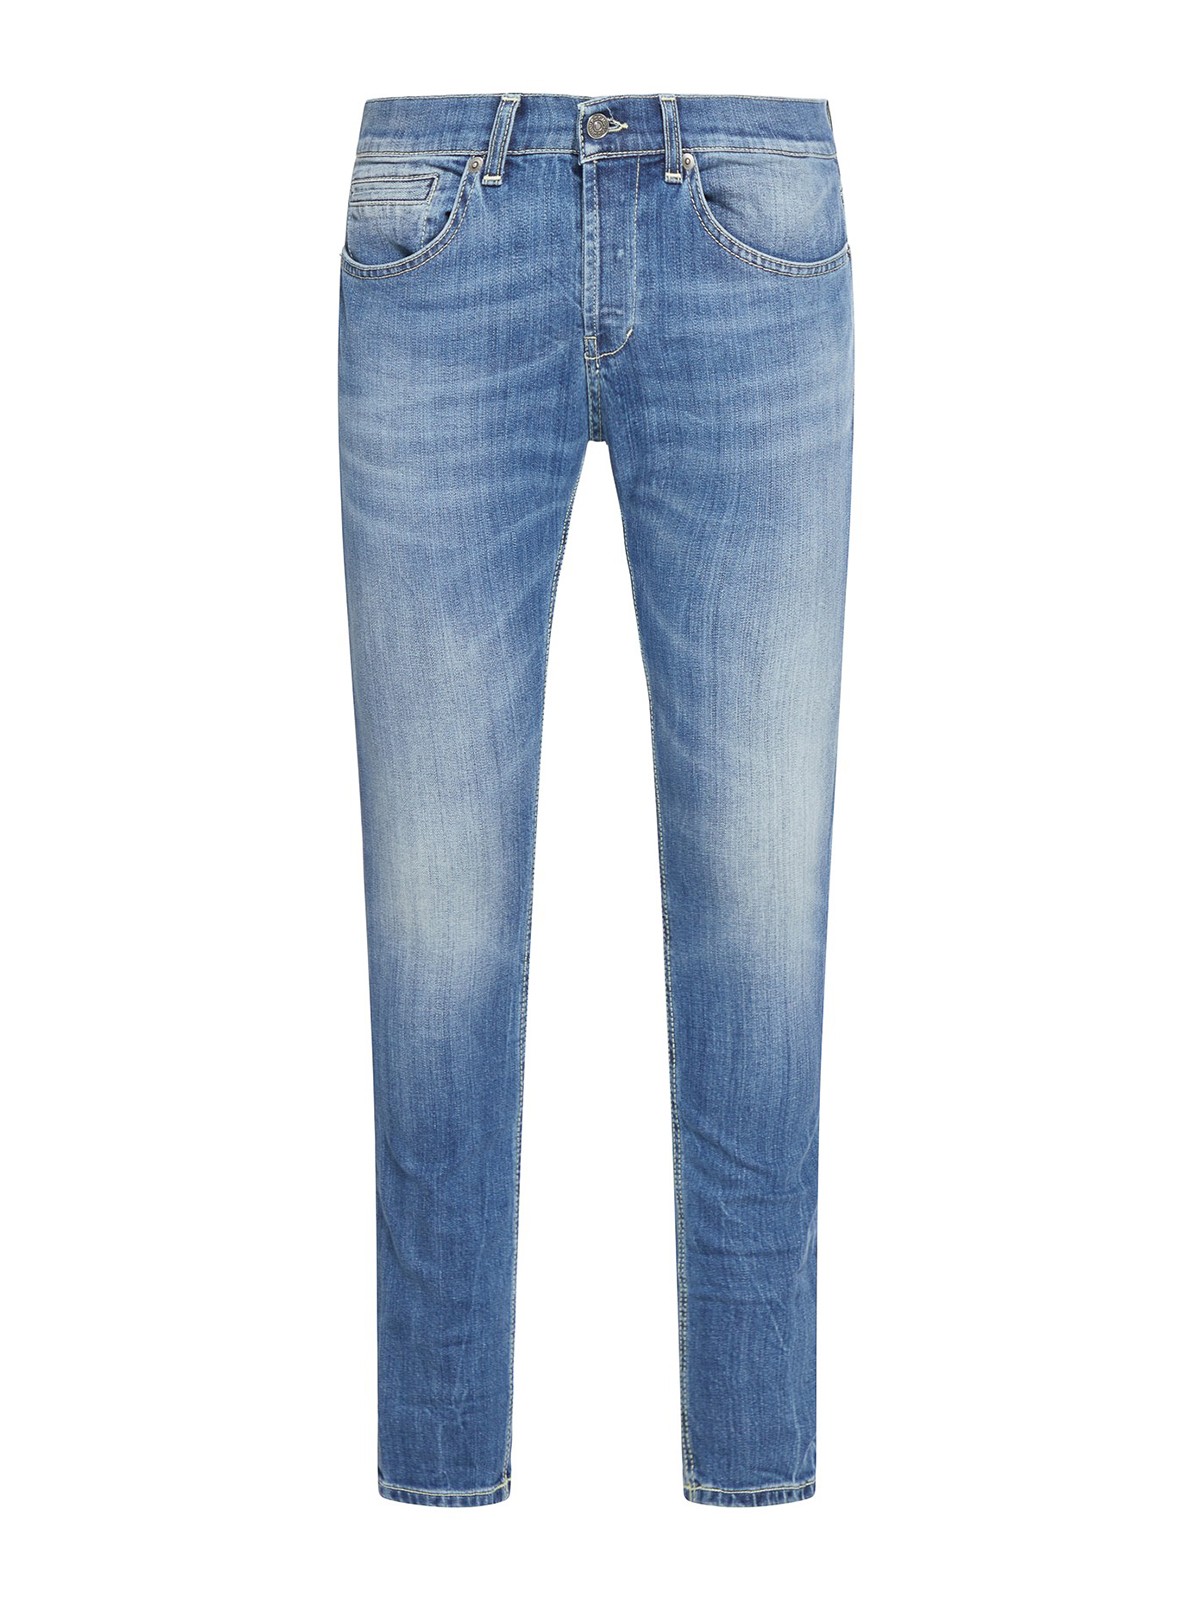 Dondup Flared Skinny Jeans In Light Wash